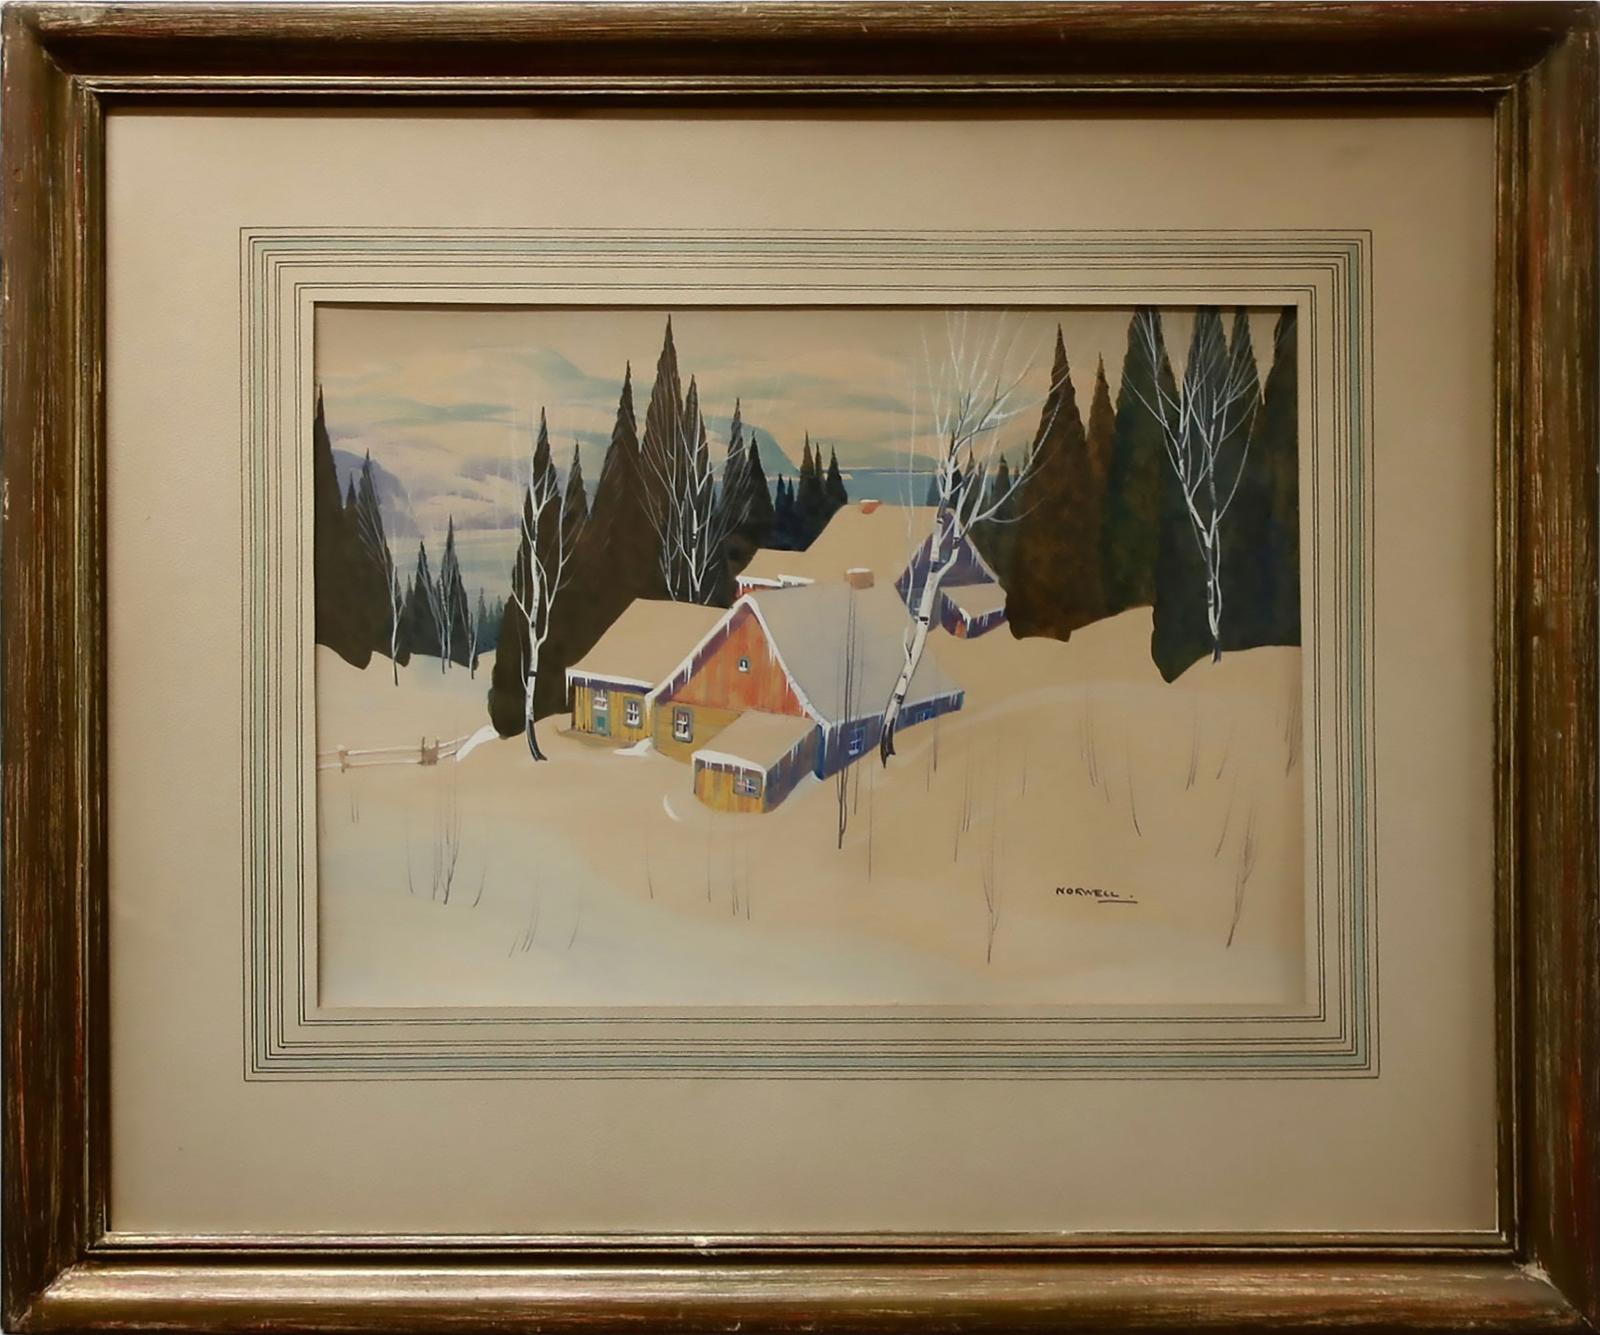 Graham Norble Norwell (1901-1967) - Untitled (Cabins In Winter - Laurentians)